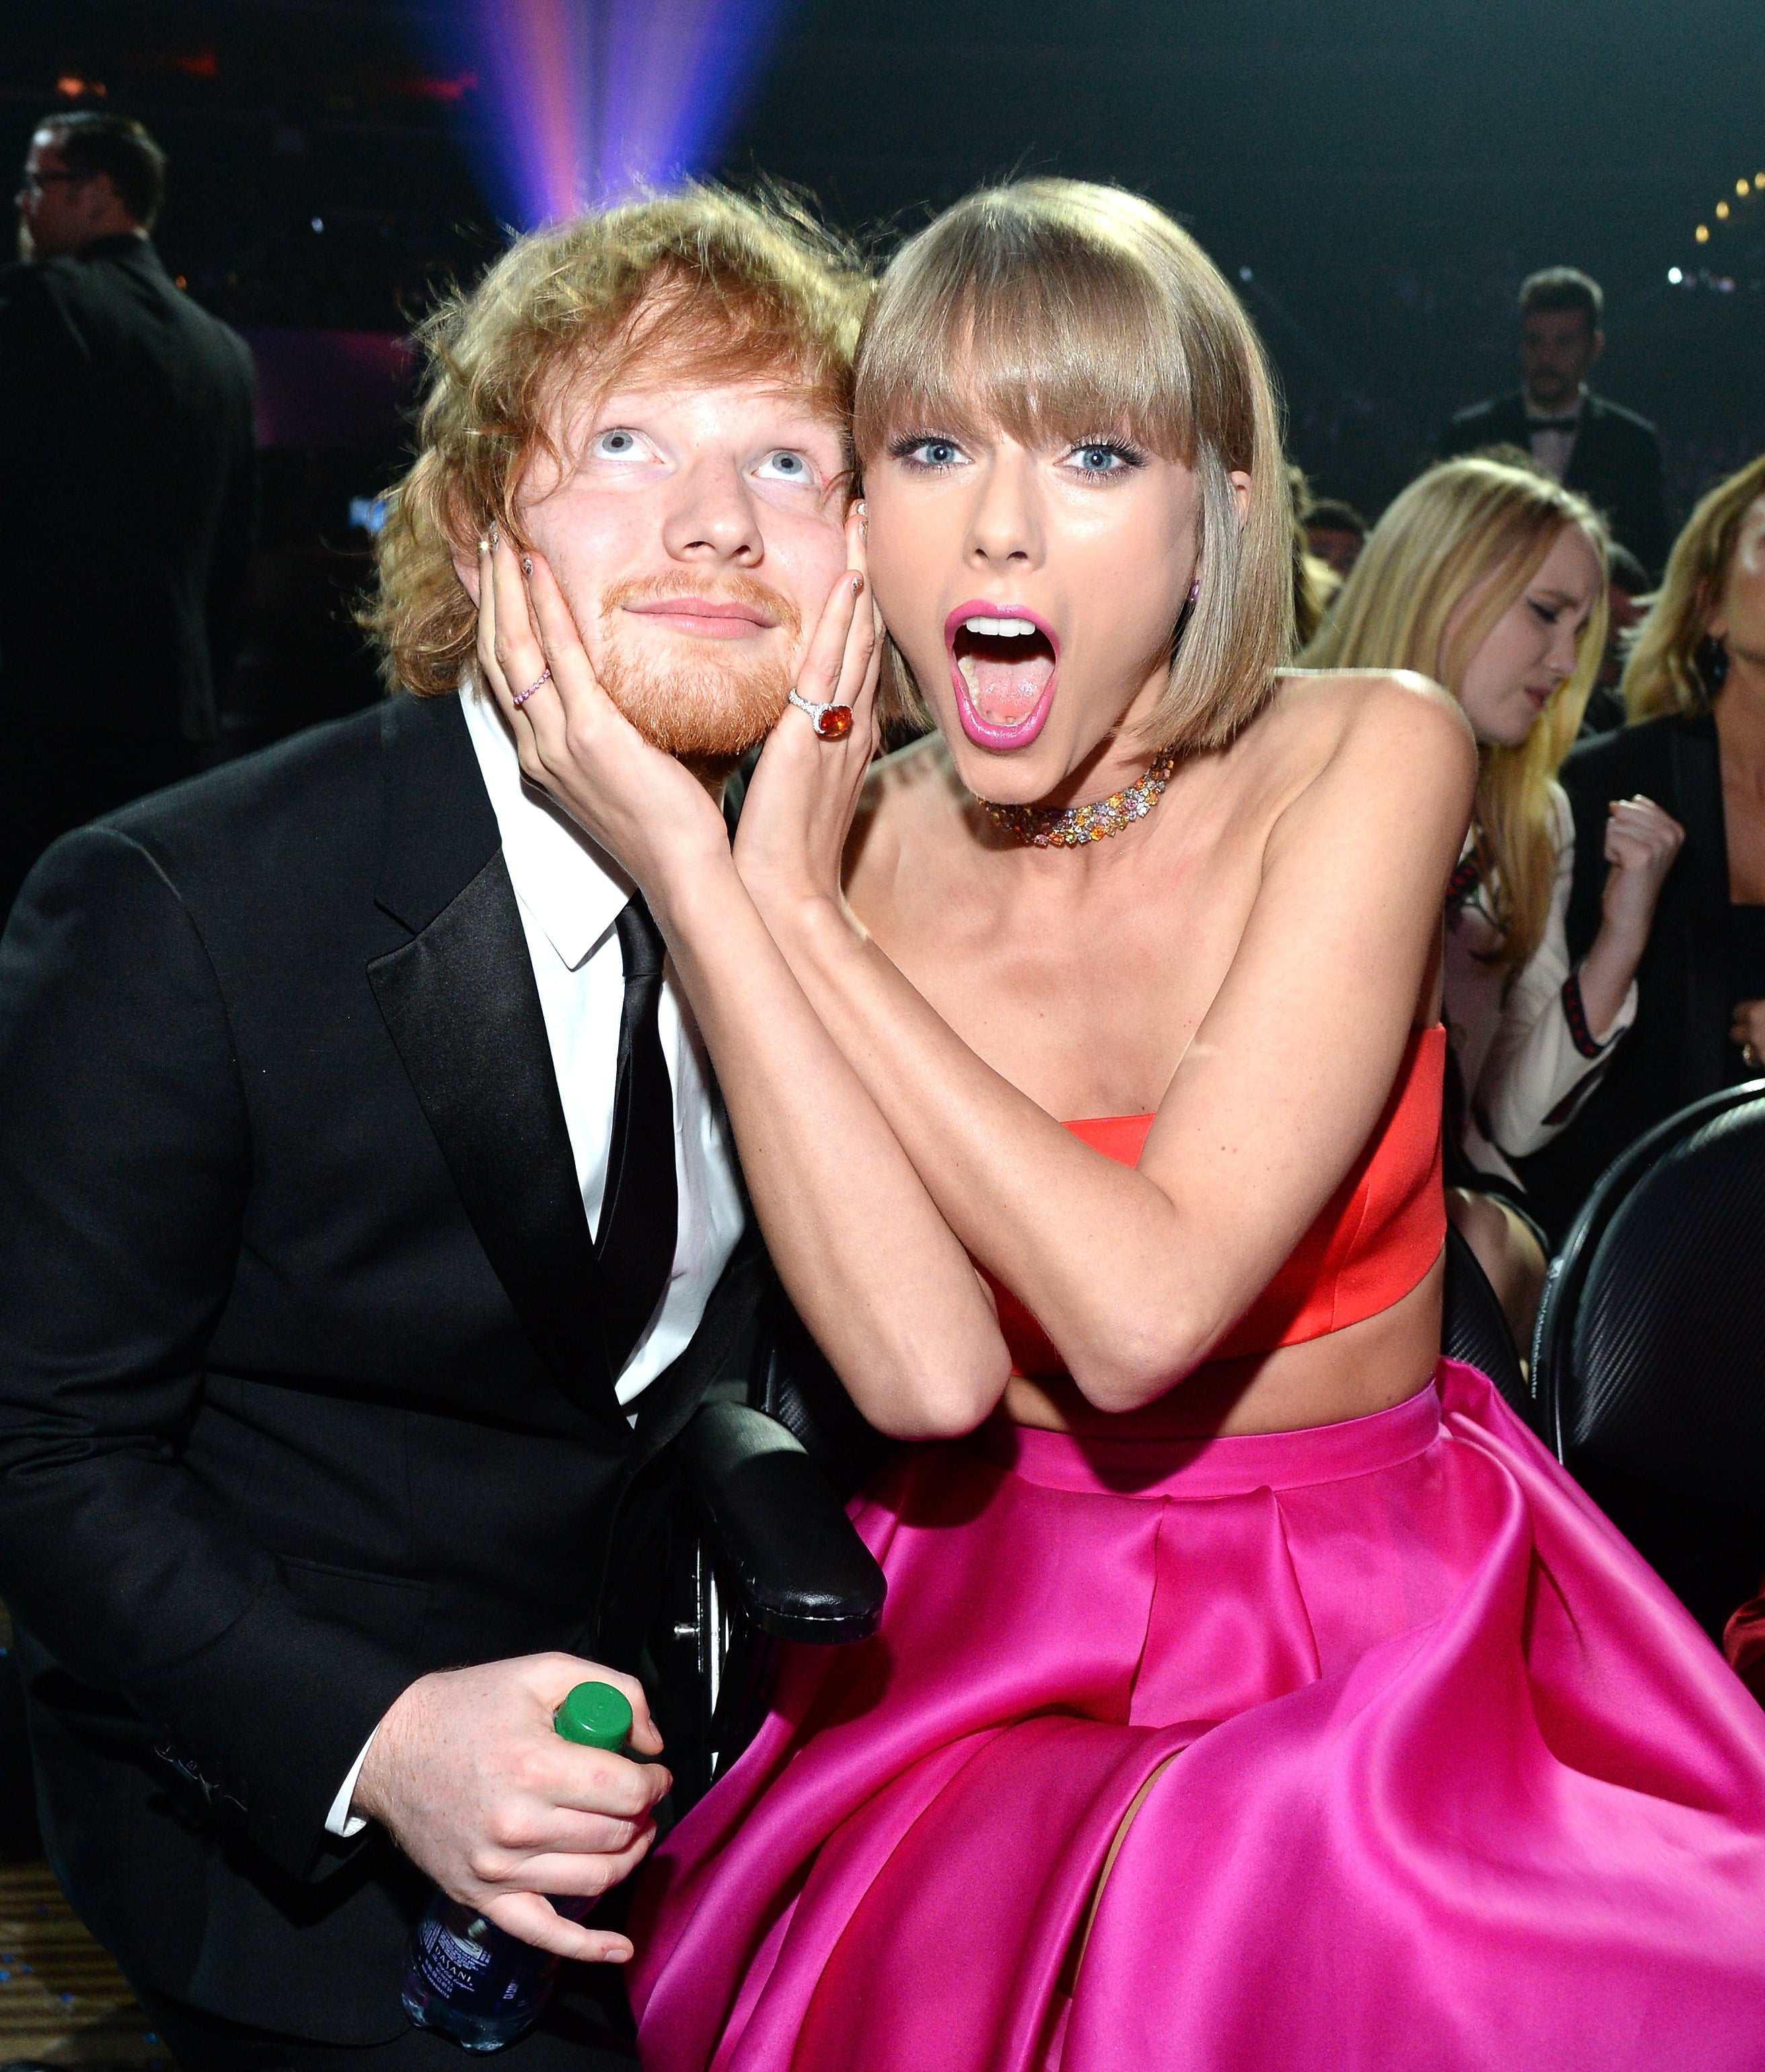 Ed Sheeran and Taylor Swift's Friendship Timeline